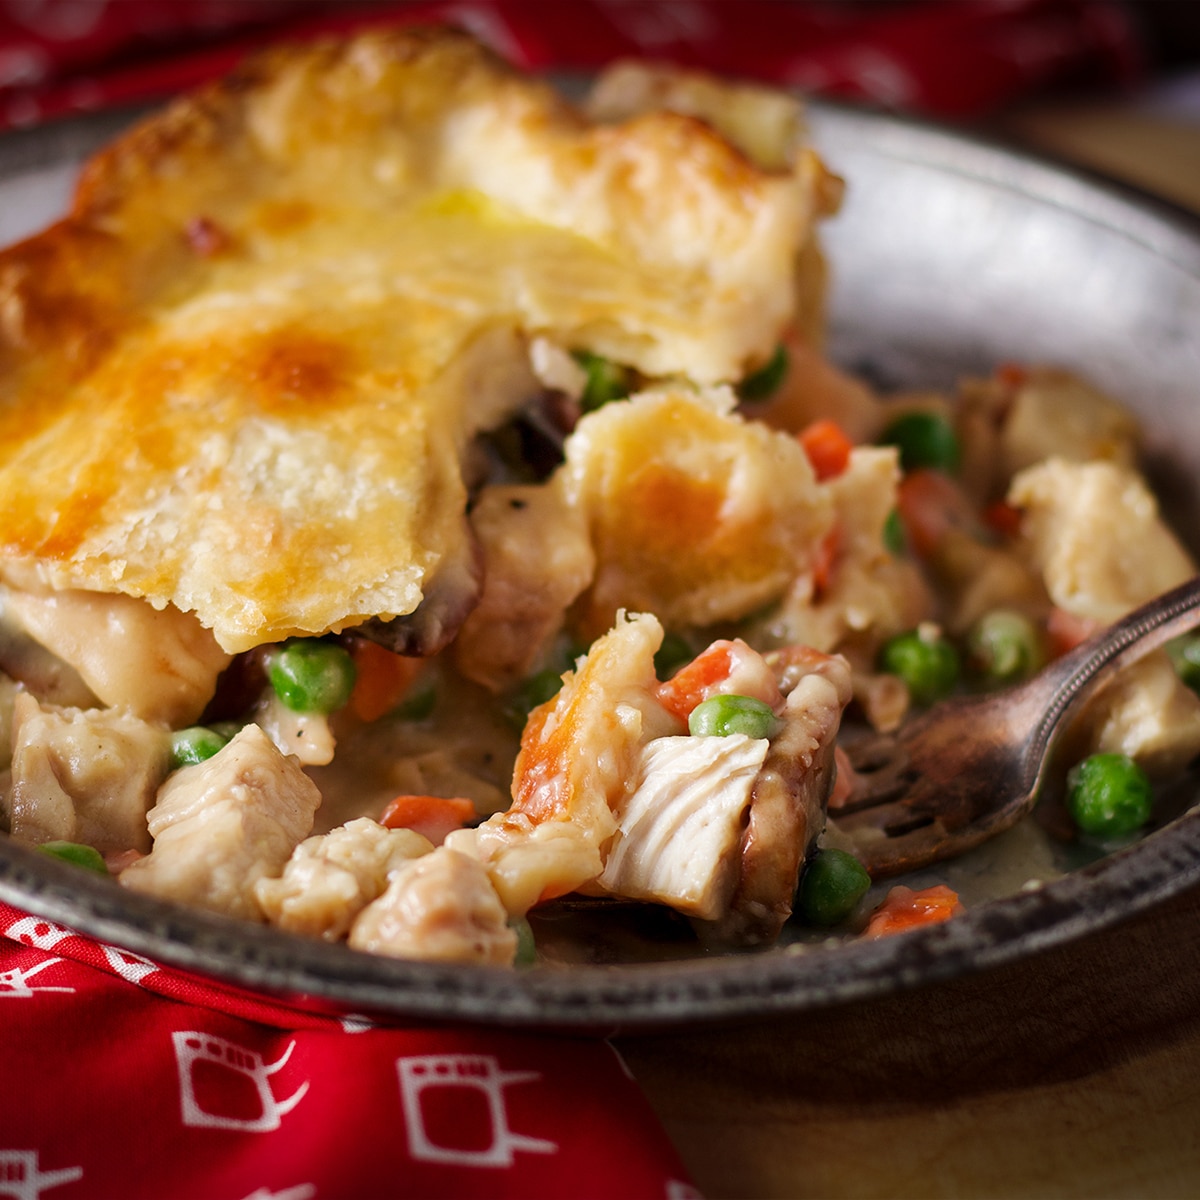 A tin plate filled with a large serving of homemade Chicken Pot Pie.